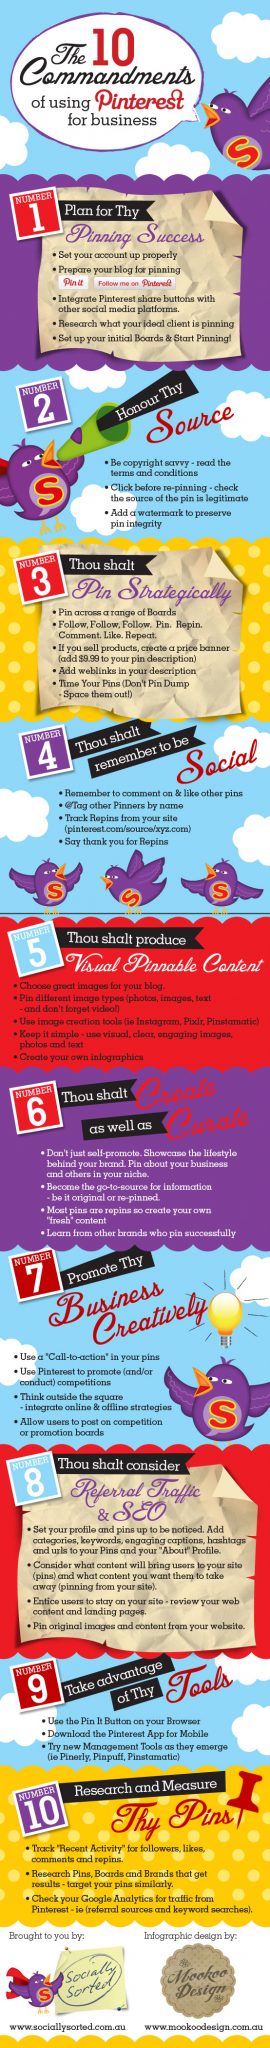 10 Commandments of Using Pinterest for Business